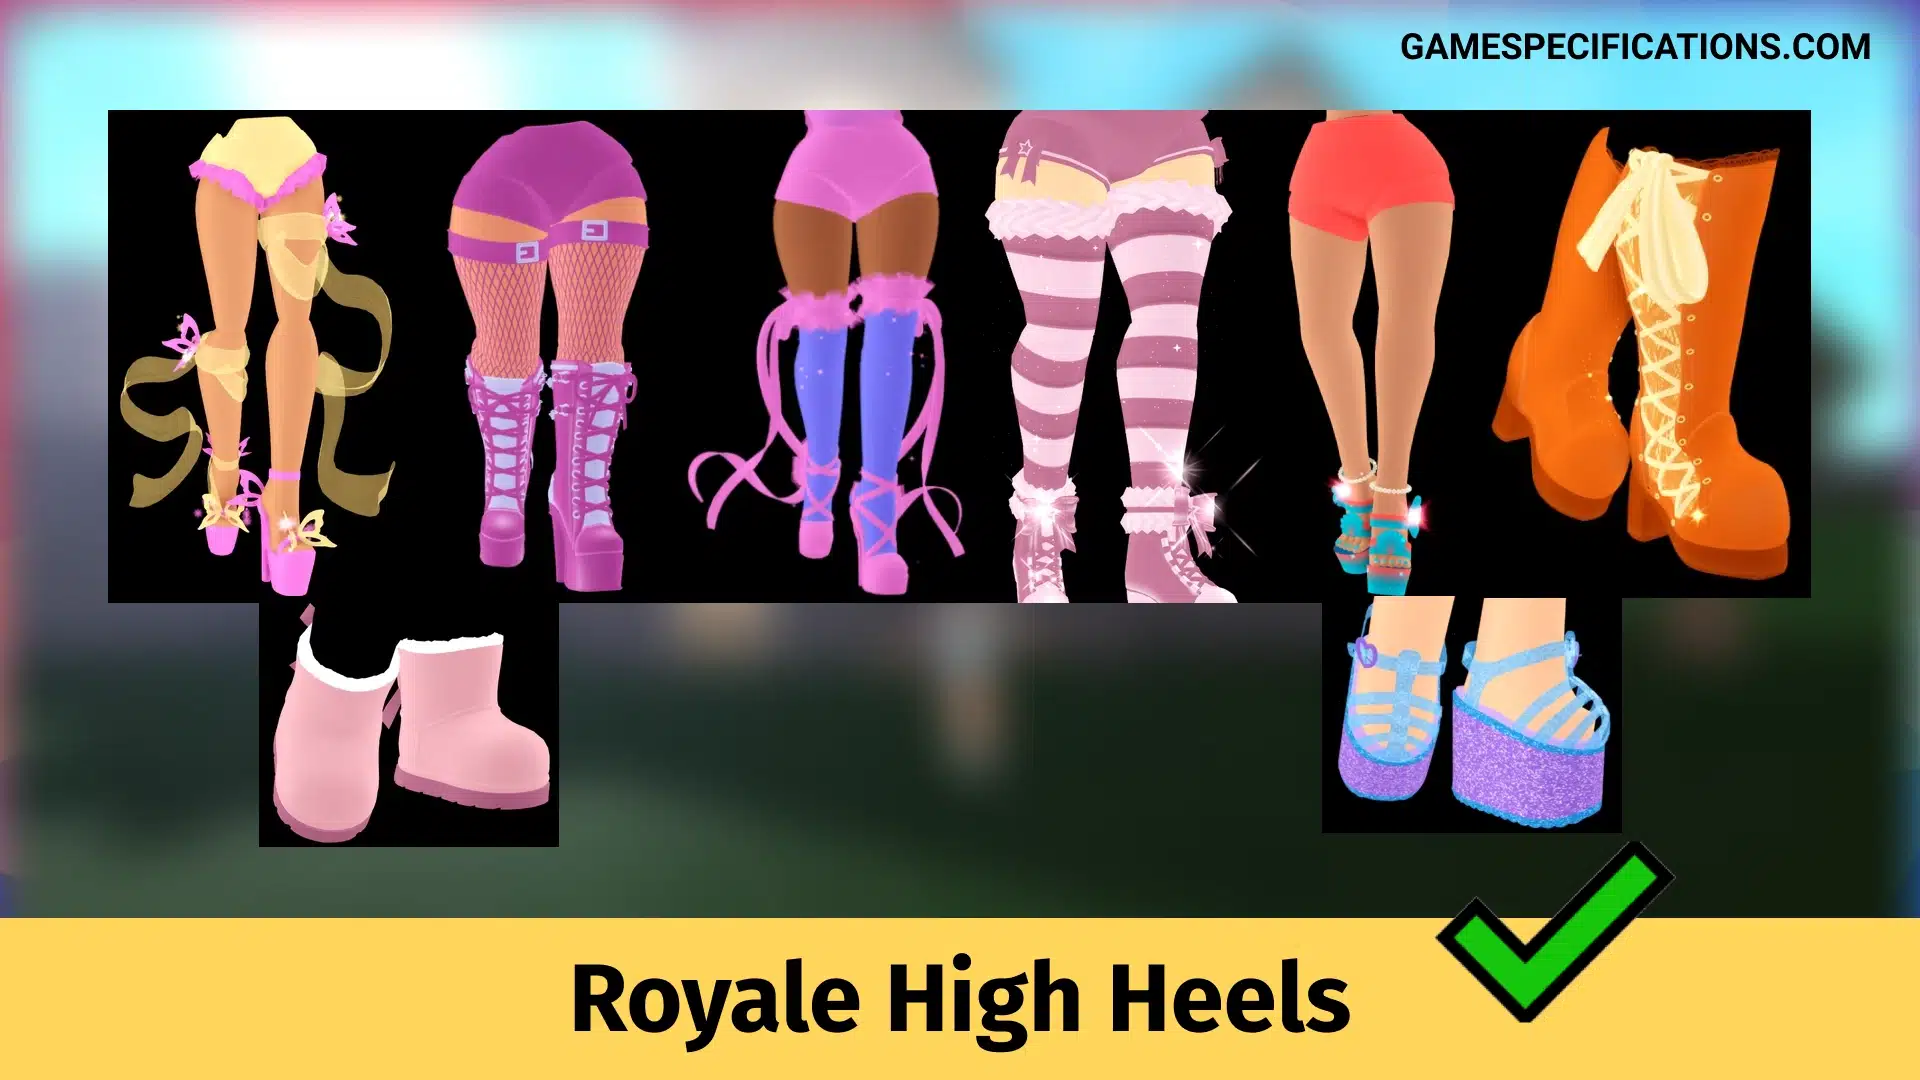 30 Royale High Heels To Look Good Game Specifications